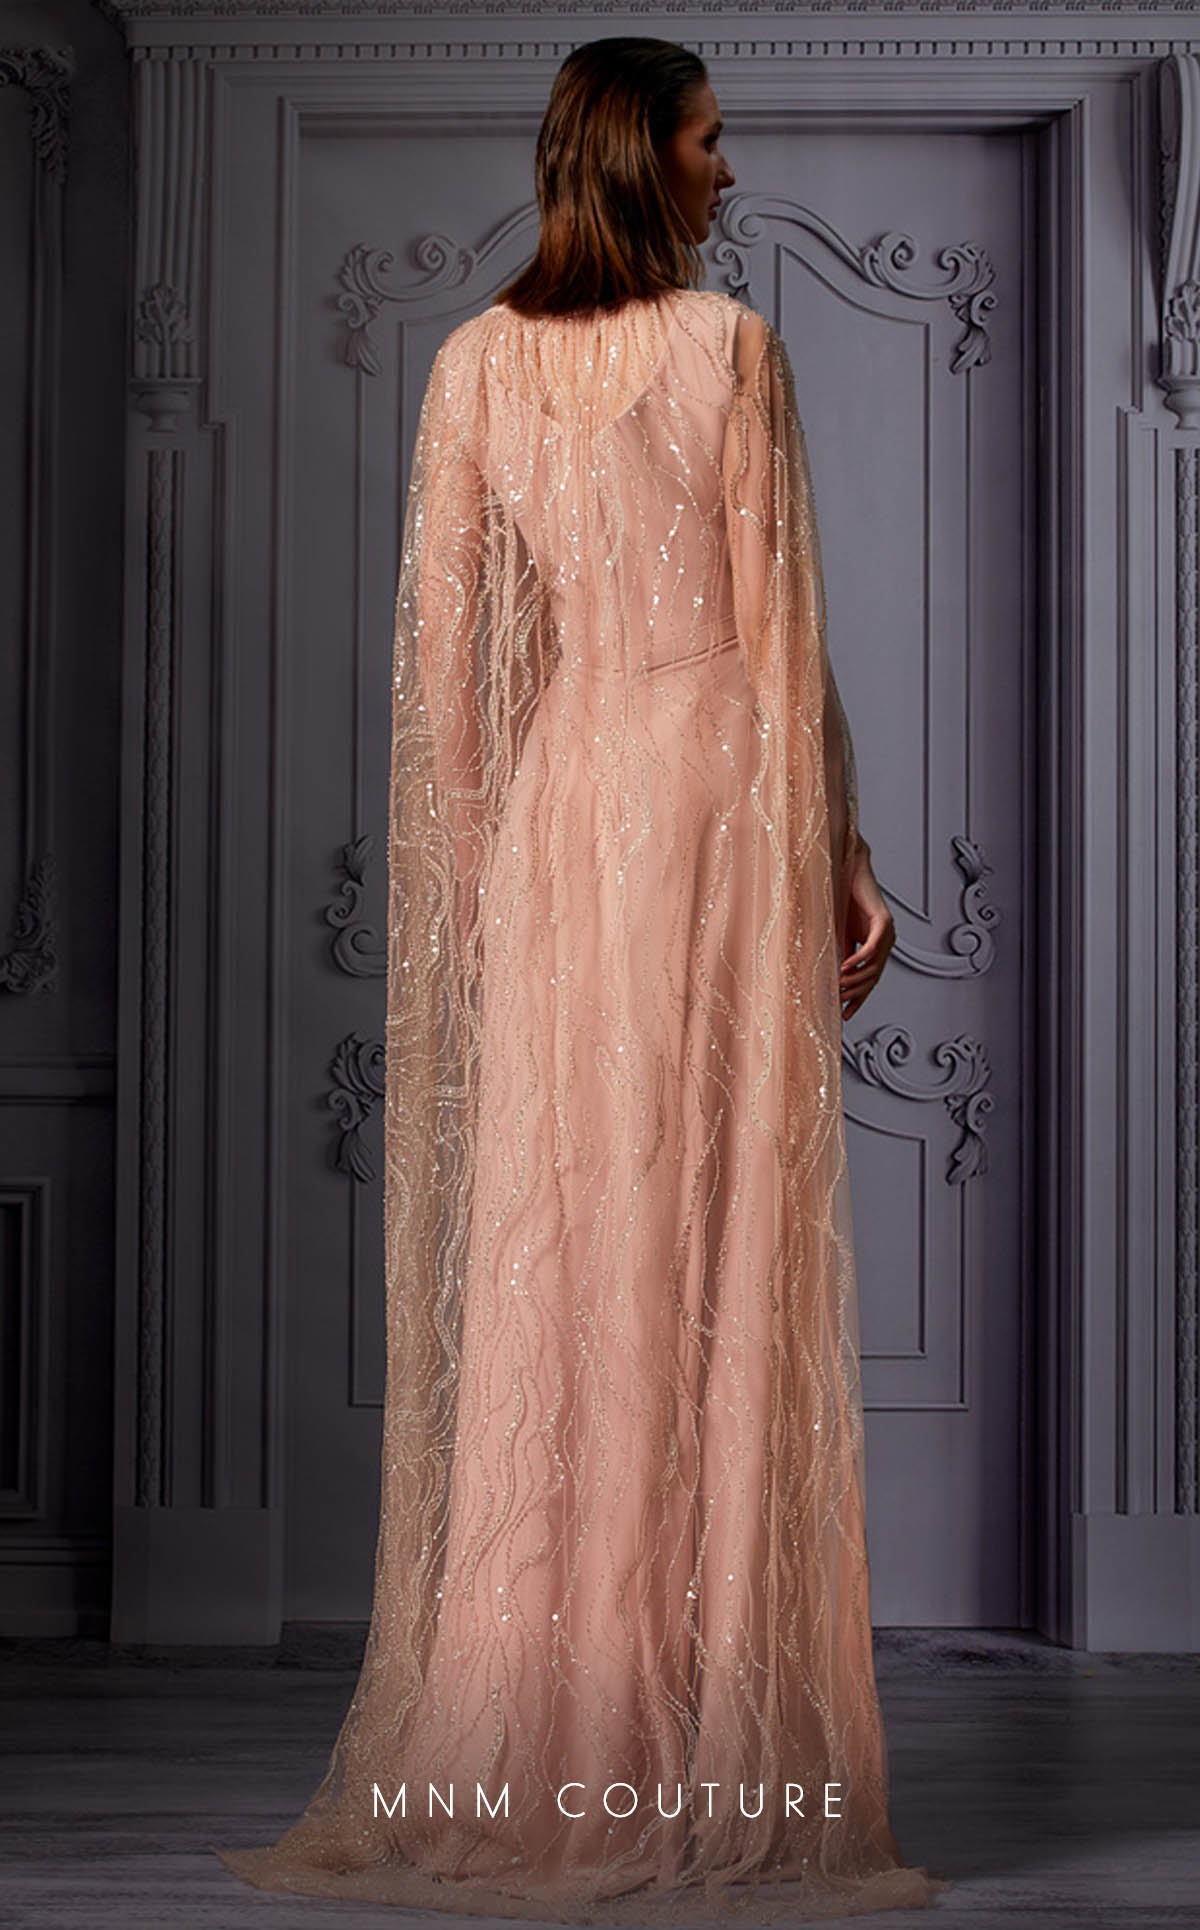 MNM-Couture-K3853-Crepe-Crew-Neck-Long-Sleeves-Fitted-Dress-Pink-Dazzling-Elegance-Style-Back-View - Rofial Beauty